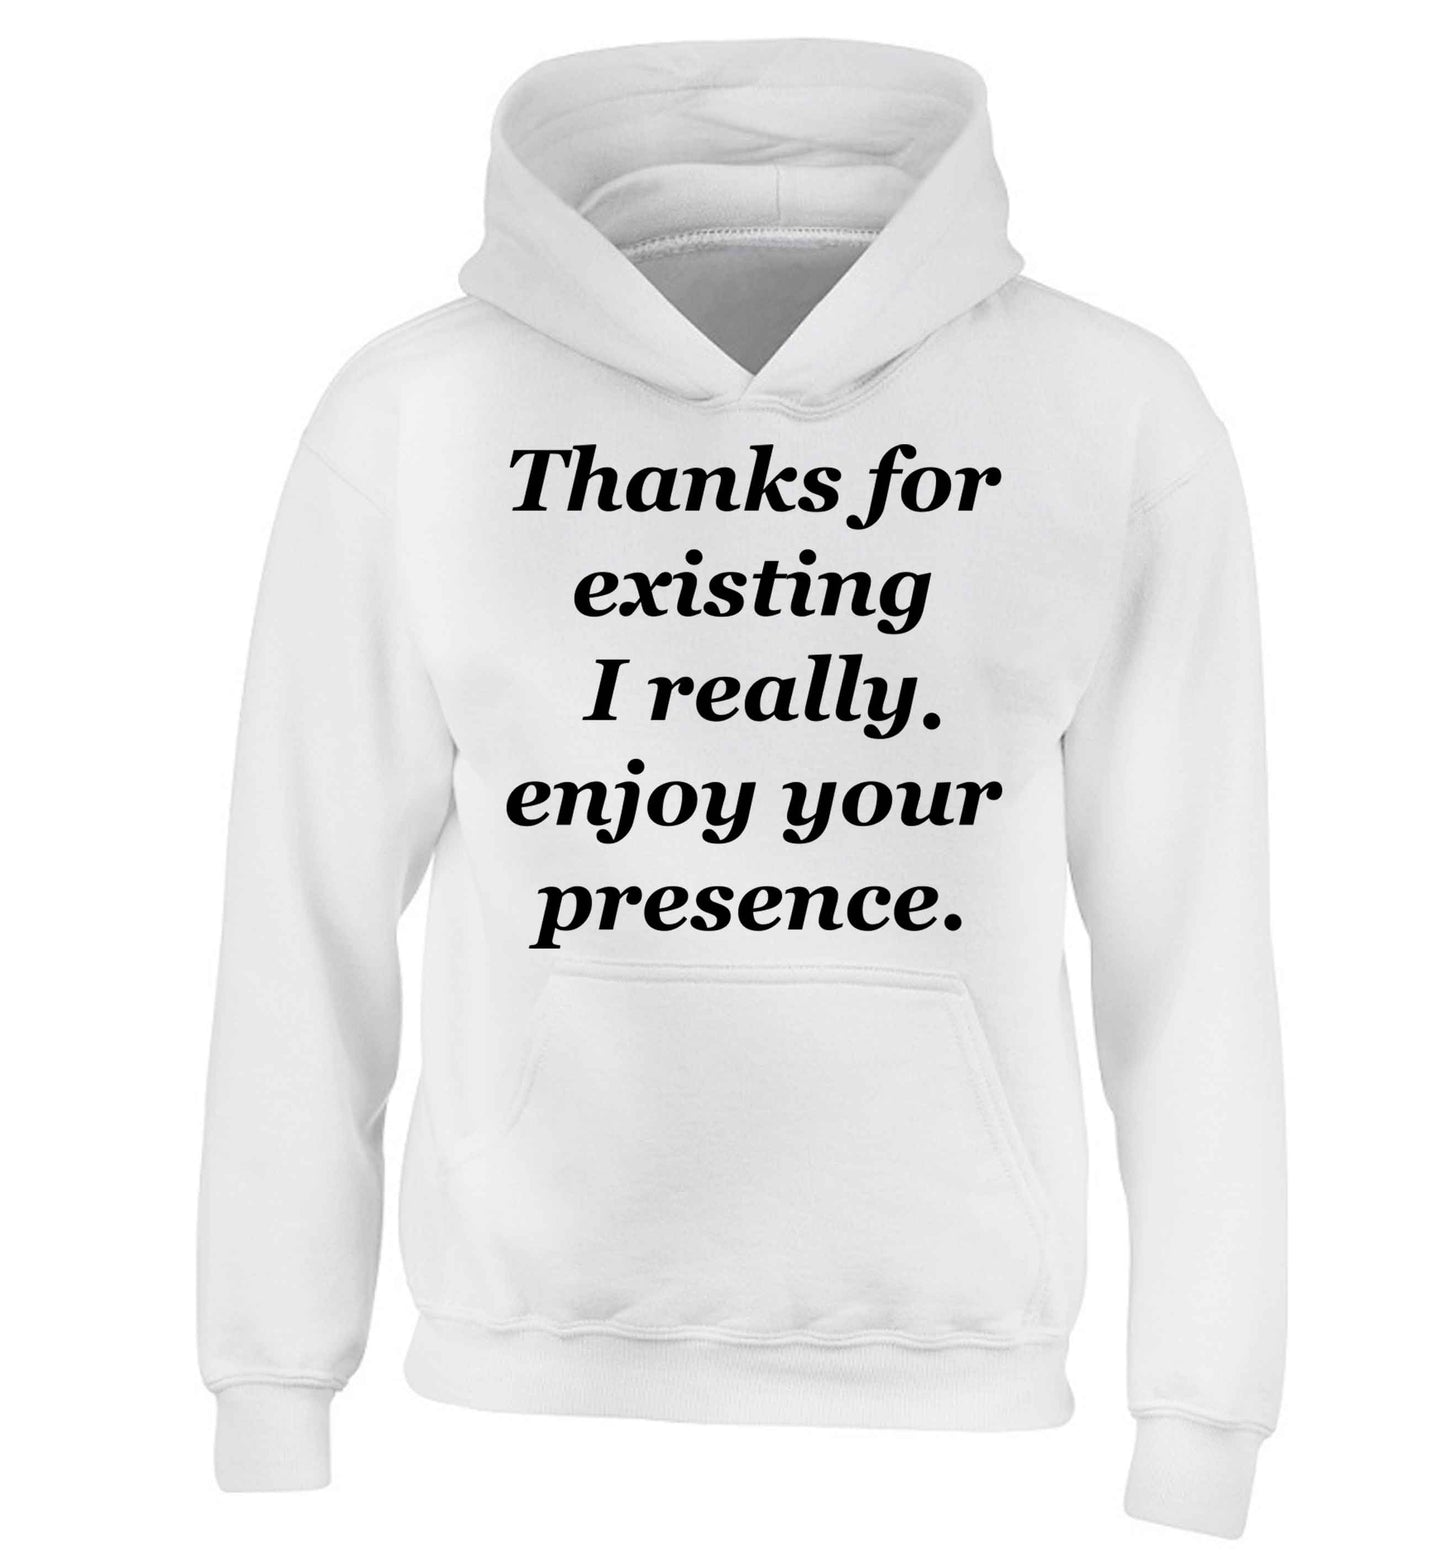 Thanks for existing I really enjoy your presence children's white hoodie 12-13 Years